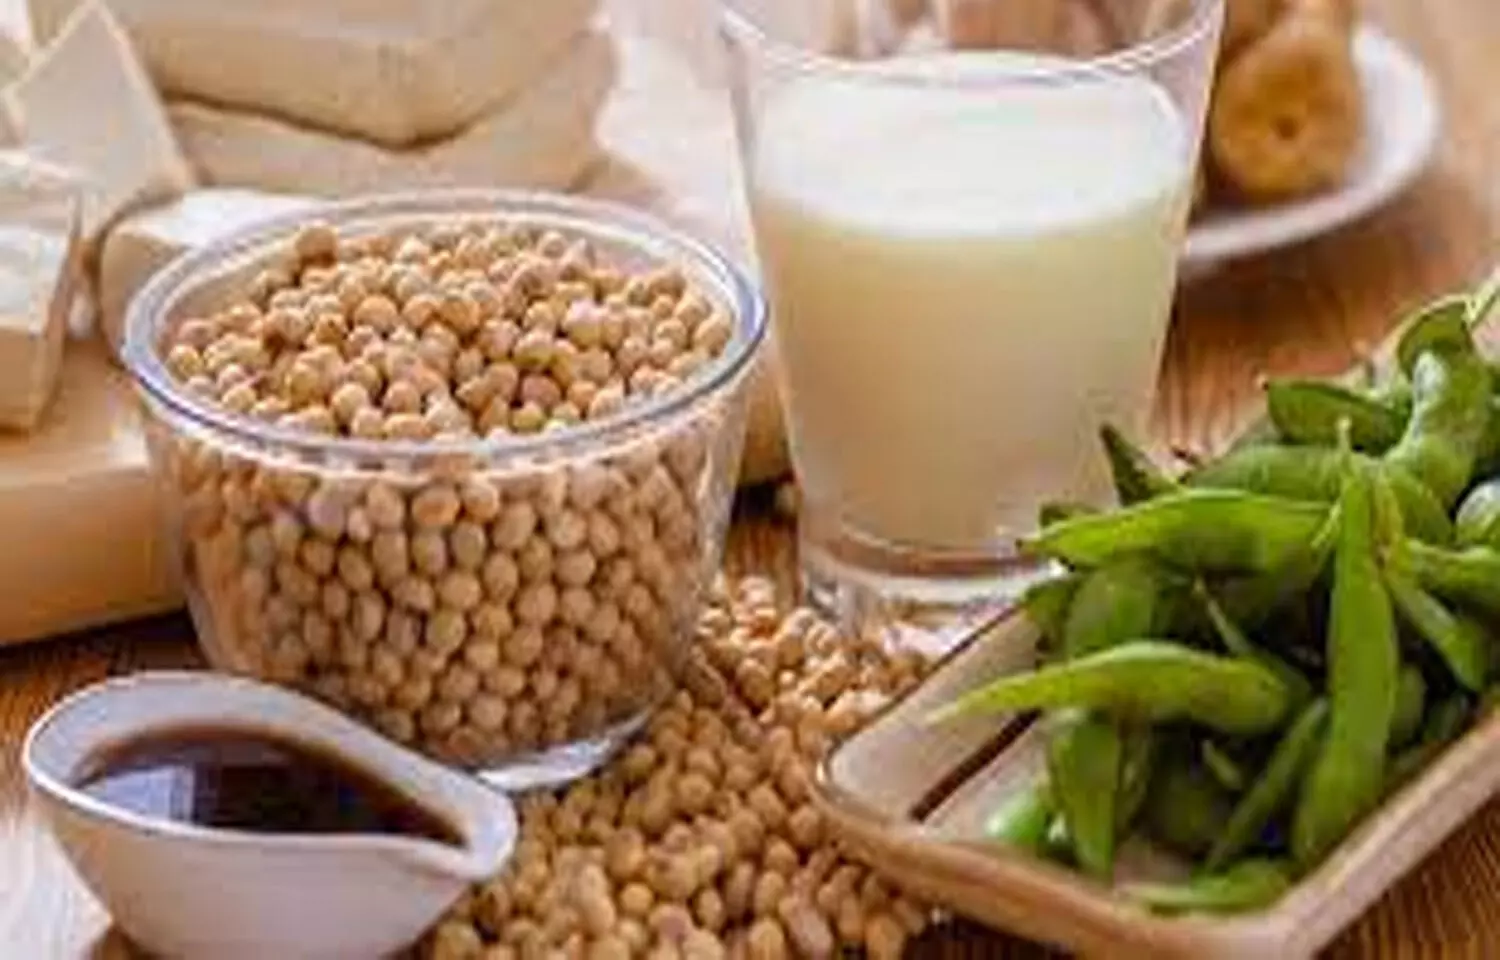 Soy-rich plant-based diet tied to 84 percent reduction in menopausal hot flashes: Study